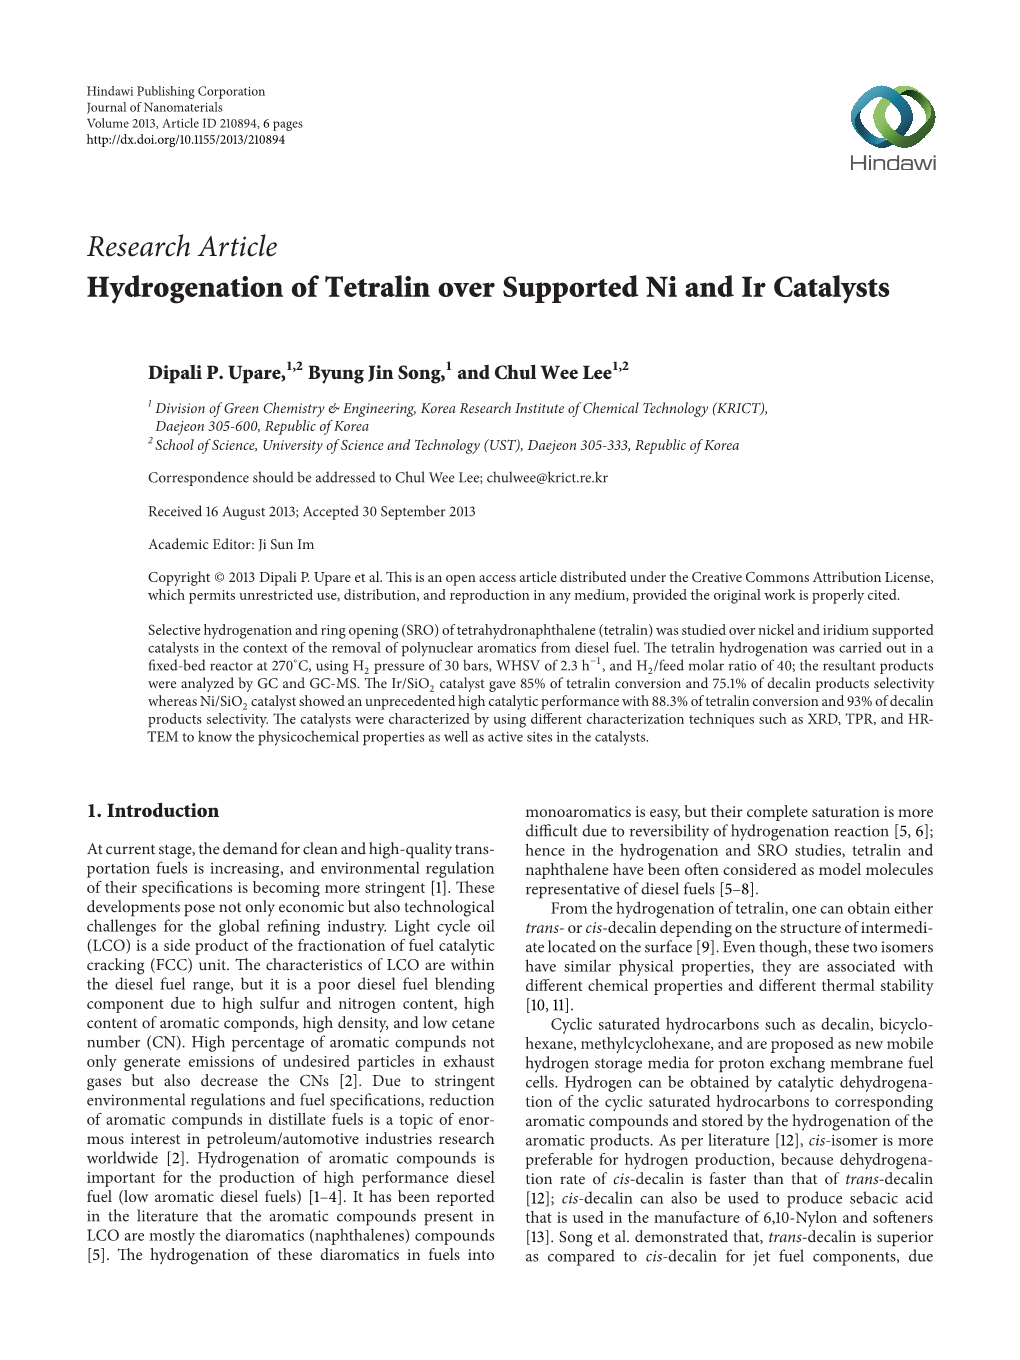 Hydrogenation of Tetralin Over Supported Ni and Ir Catalysts